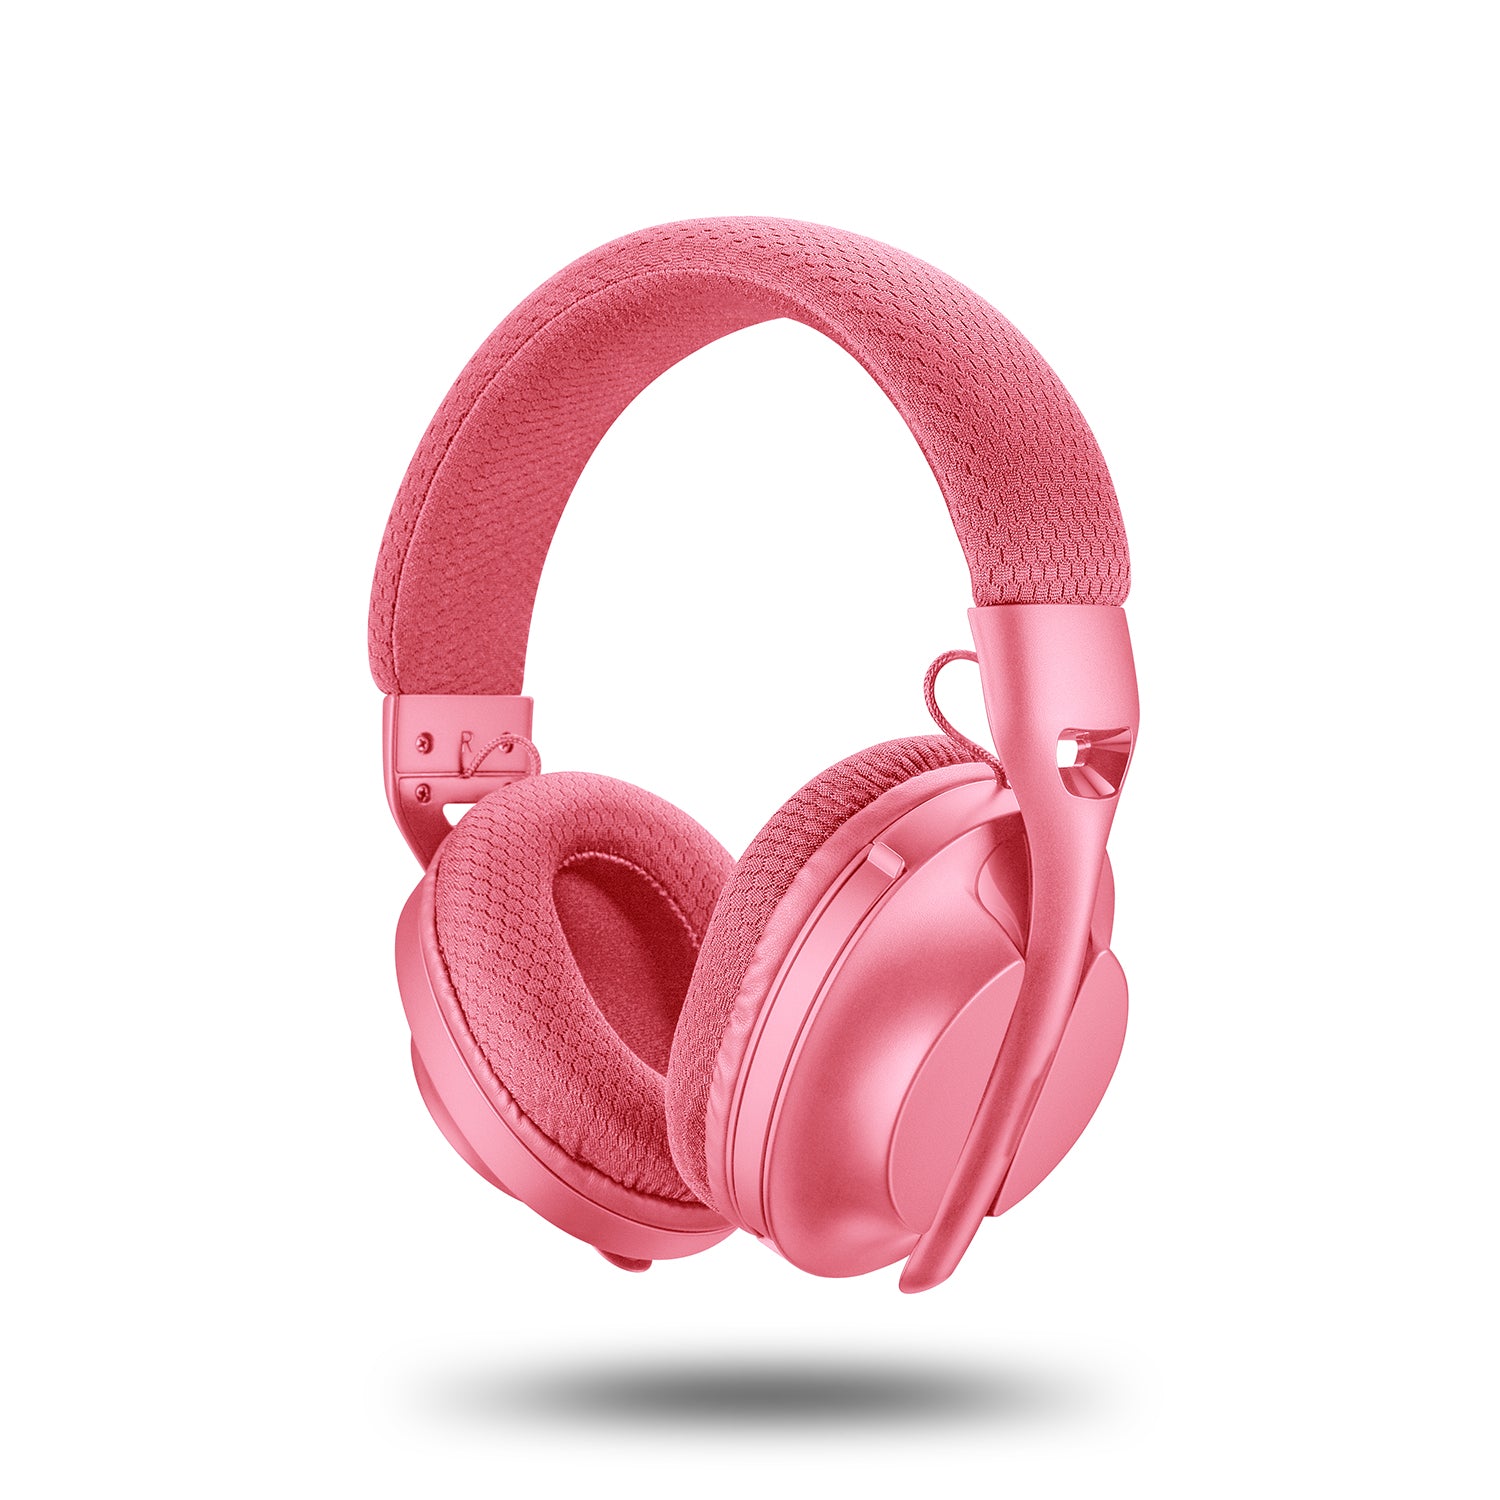 M360 Tri-Mode Gaming Headset In Pink Angled View